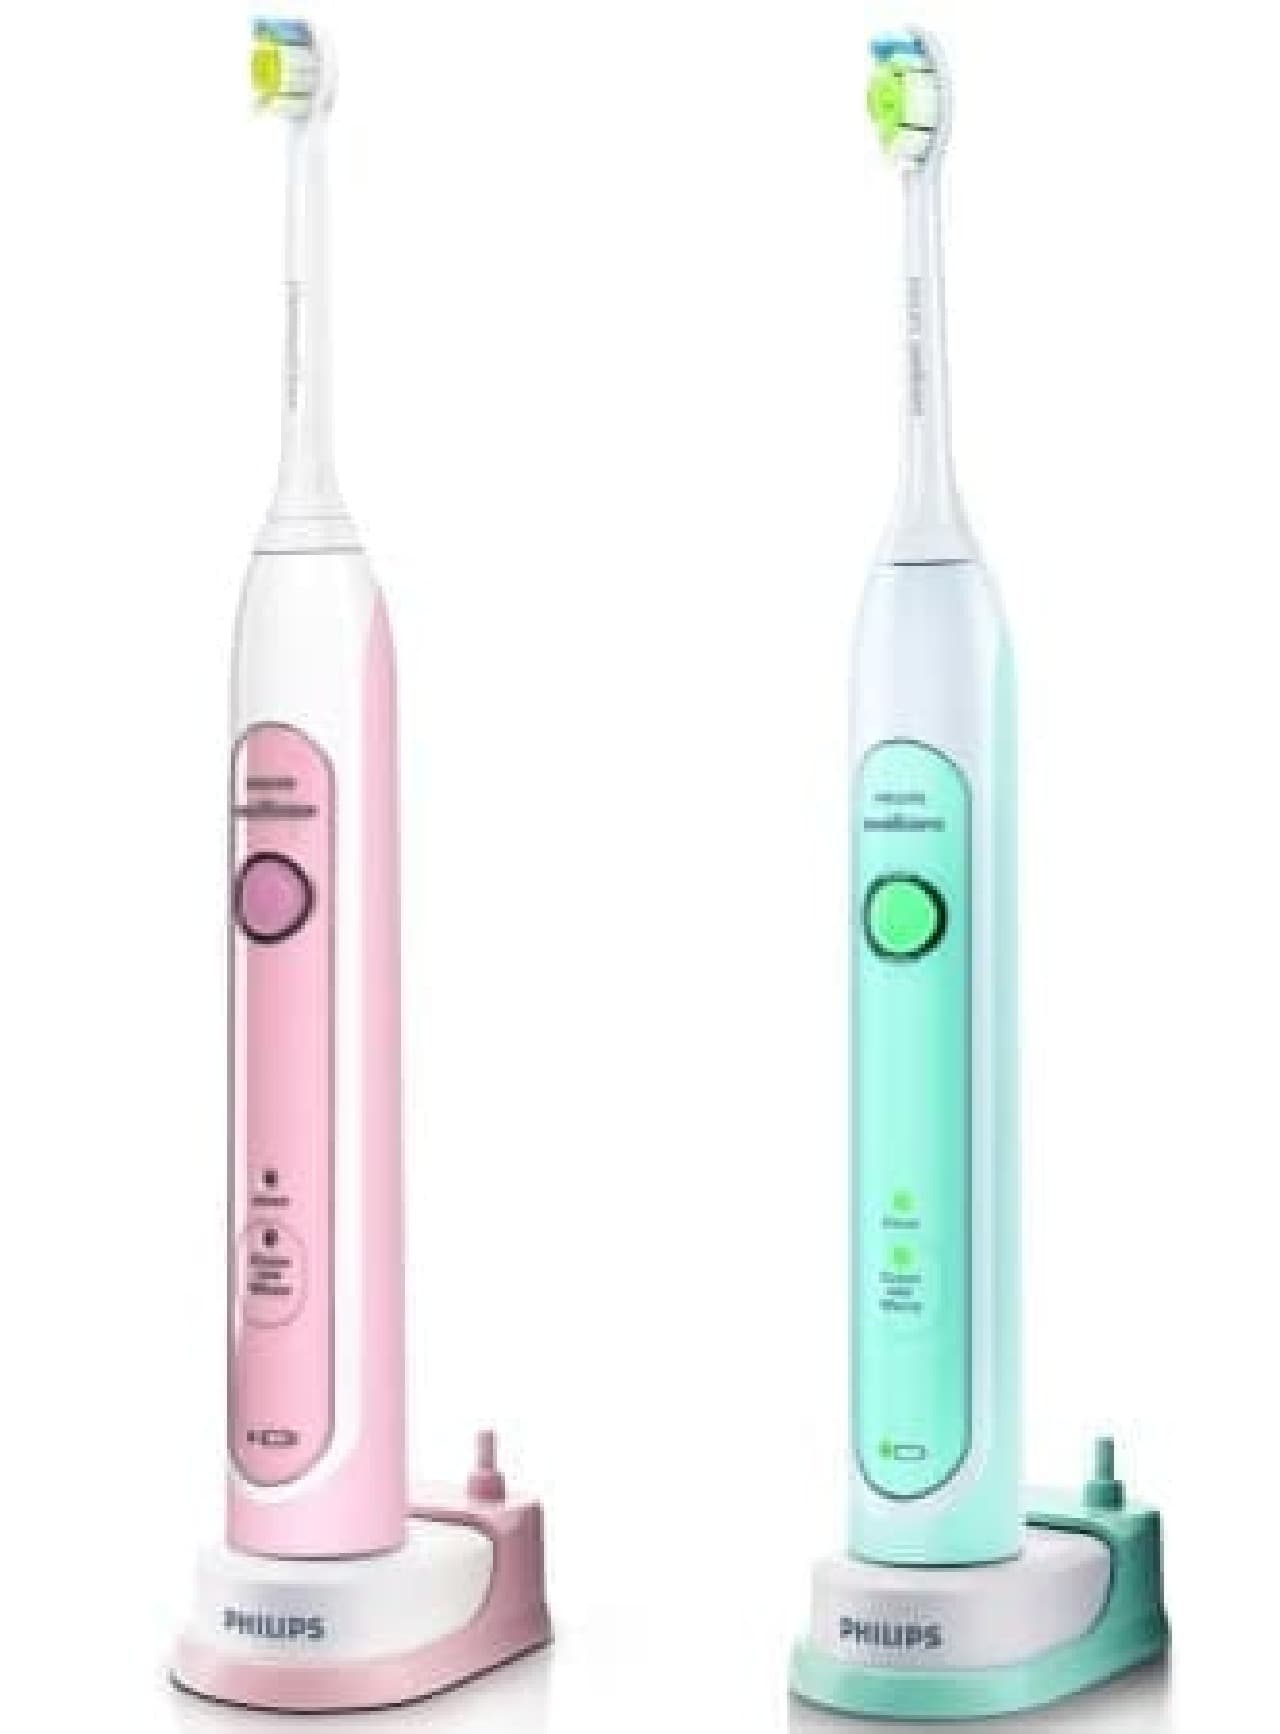 Sonicare "Healthy White"